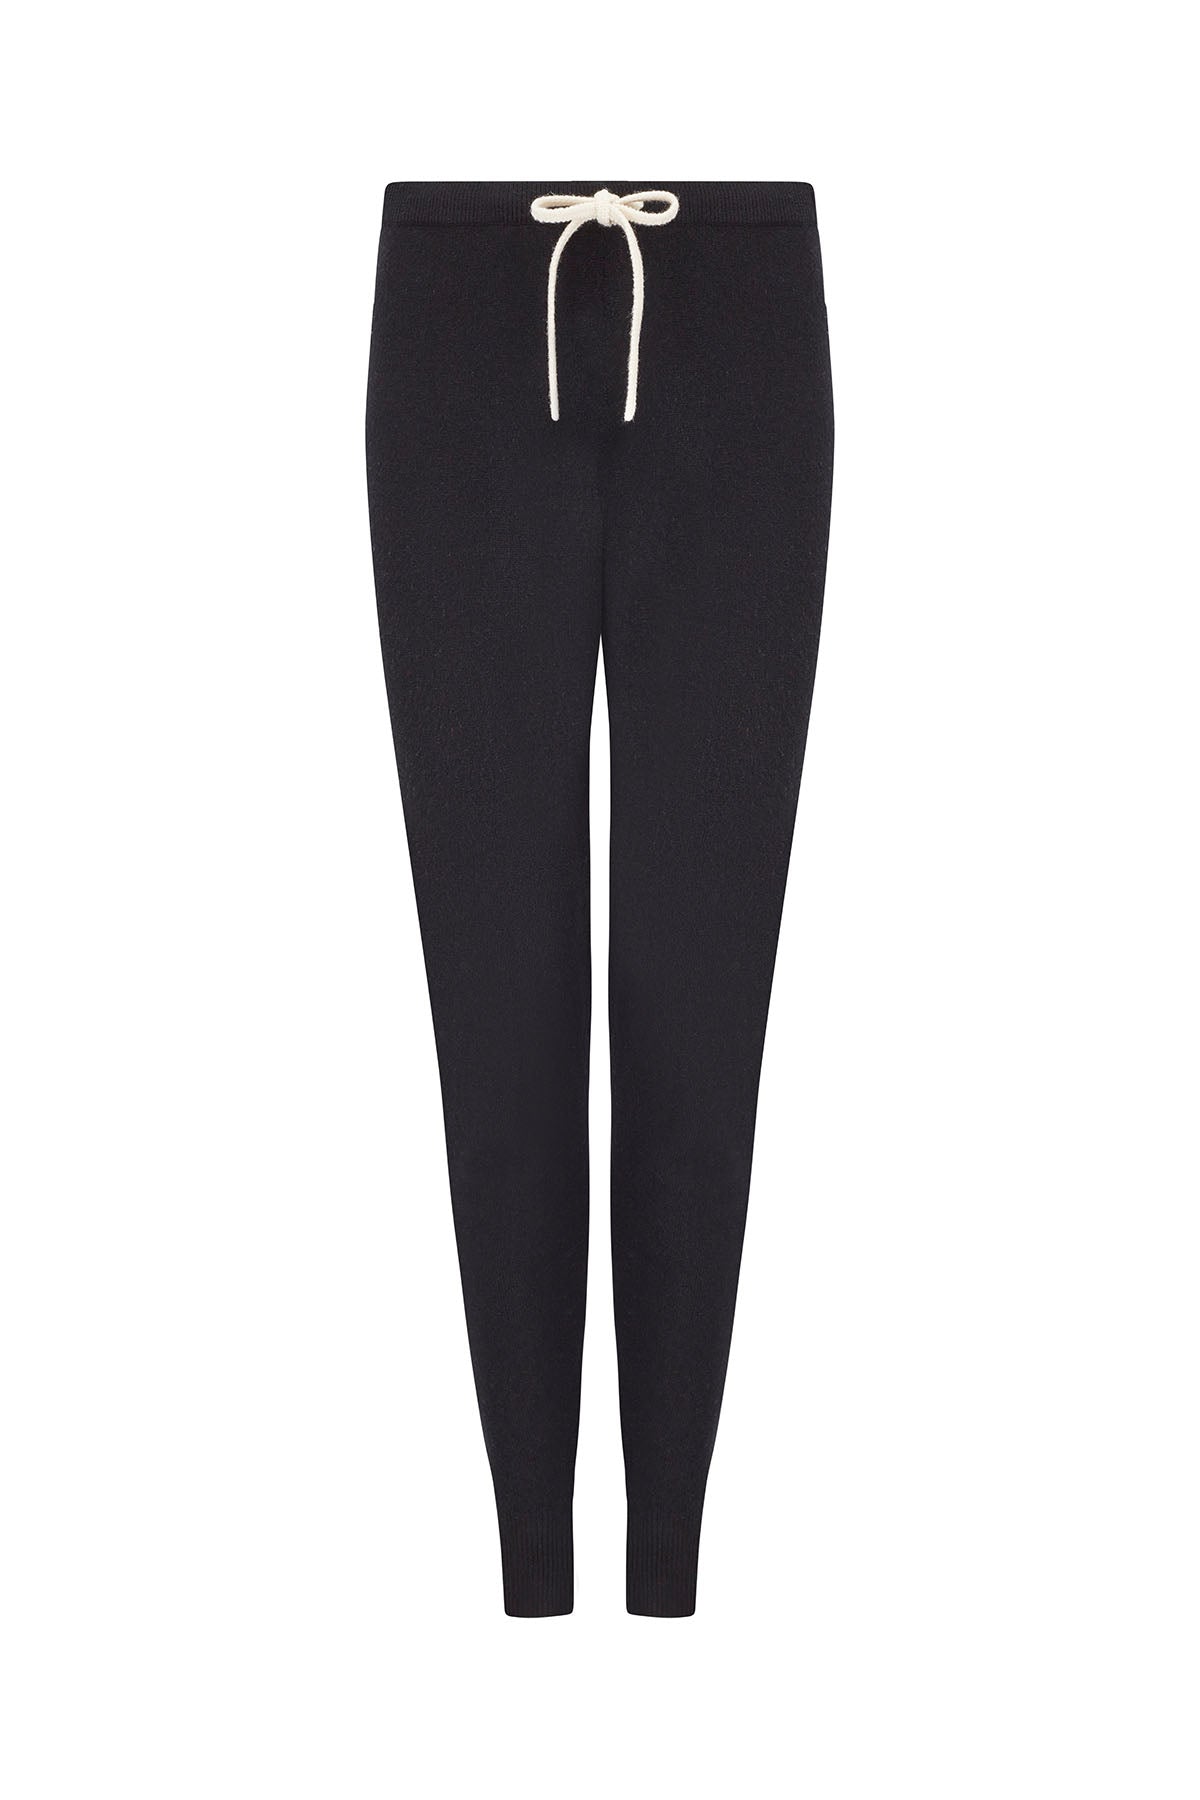 THE WAITING IN THE WINGS' TRACKSUIT Pant